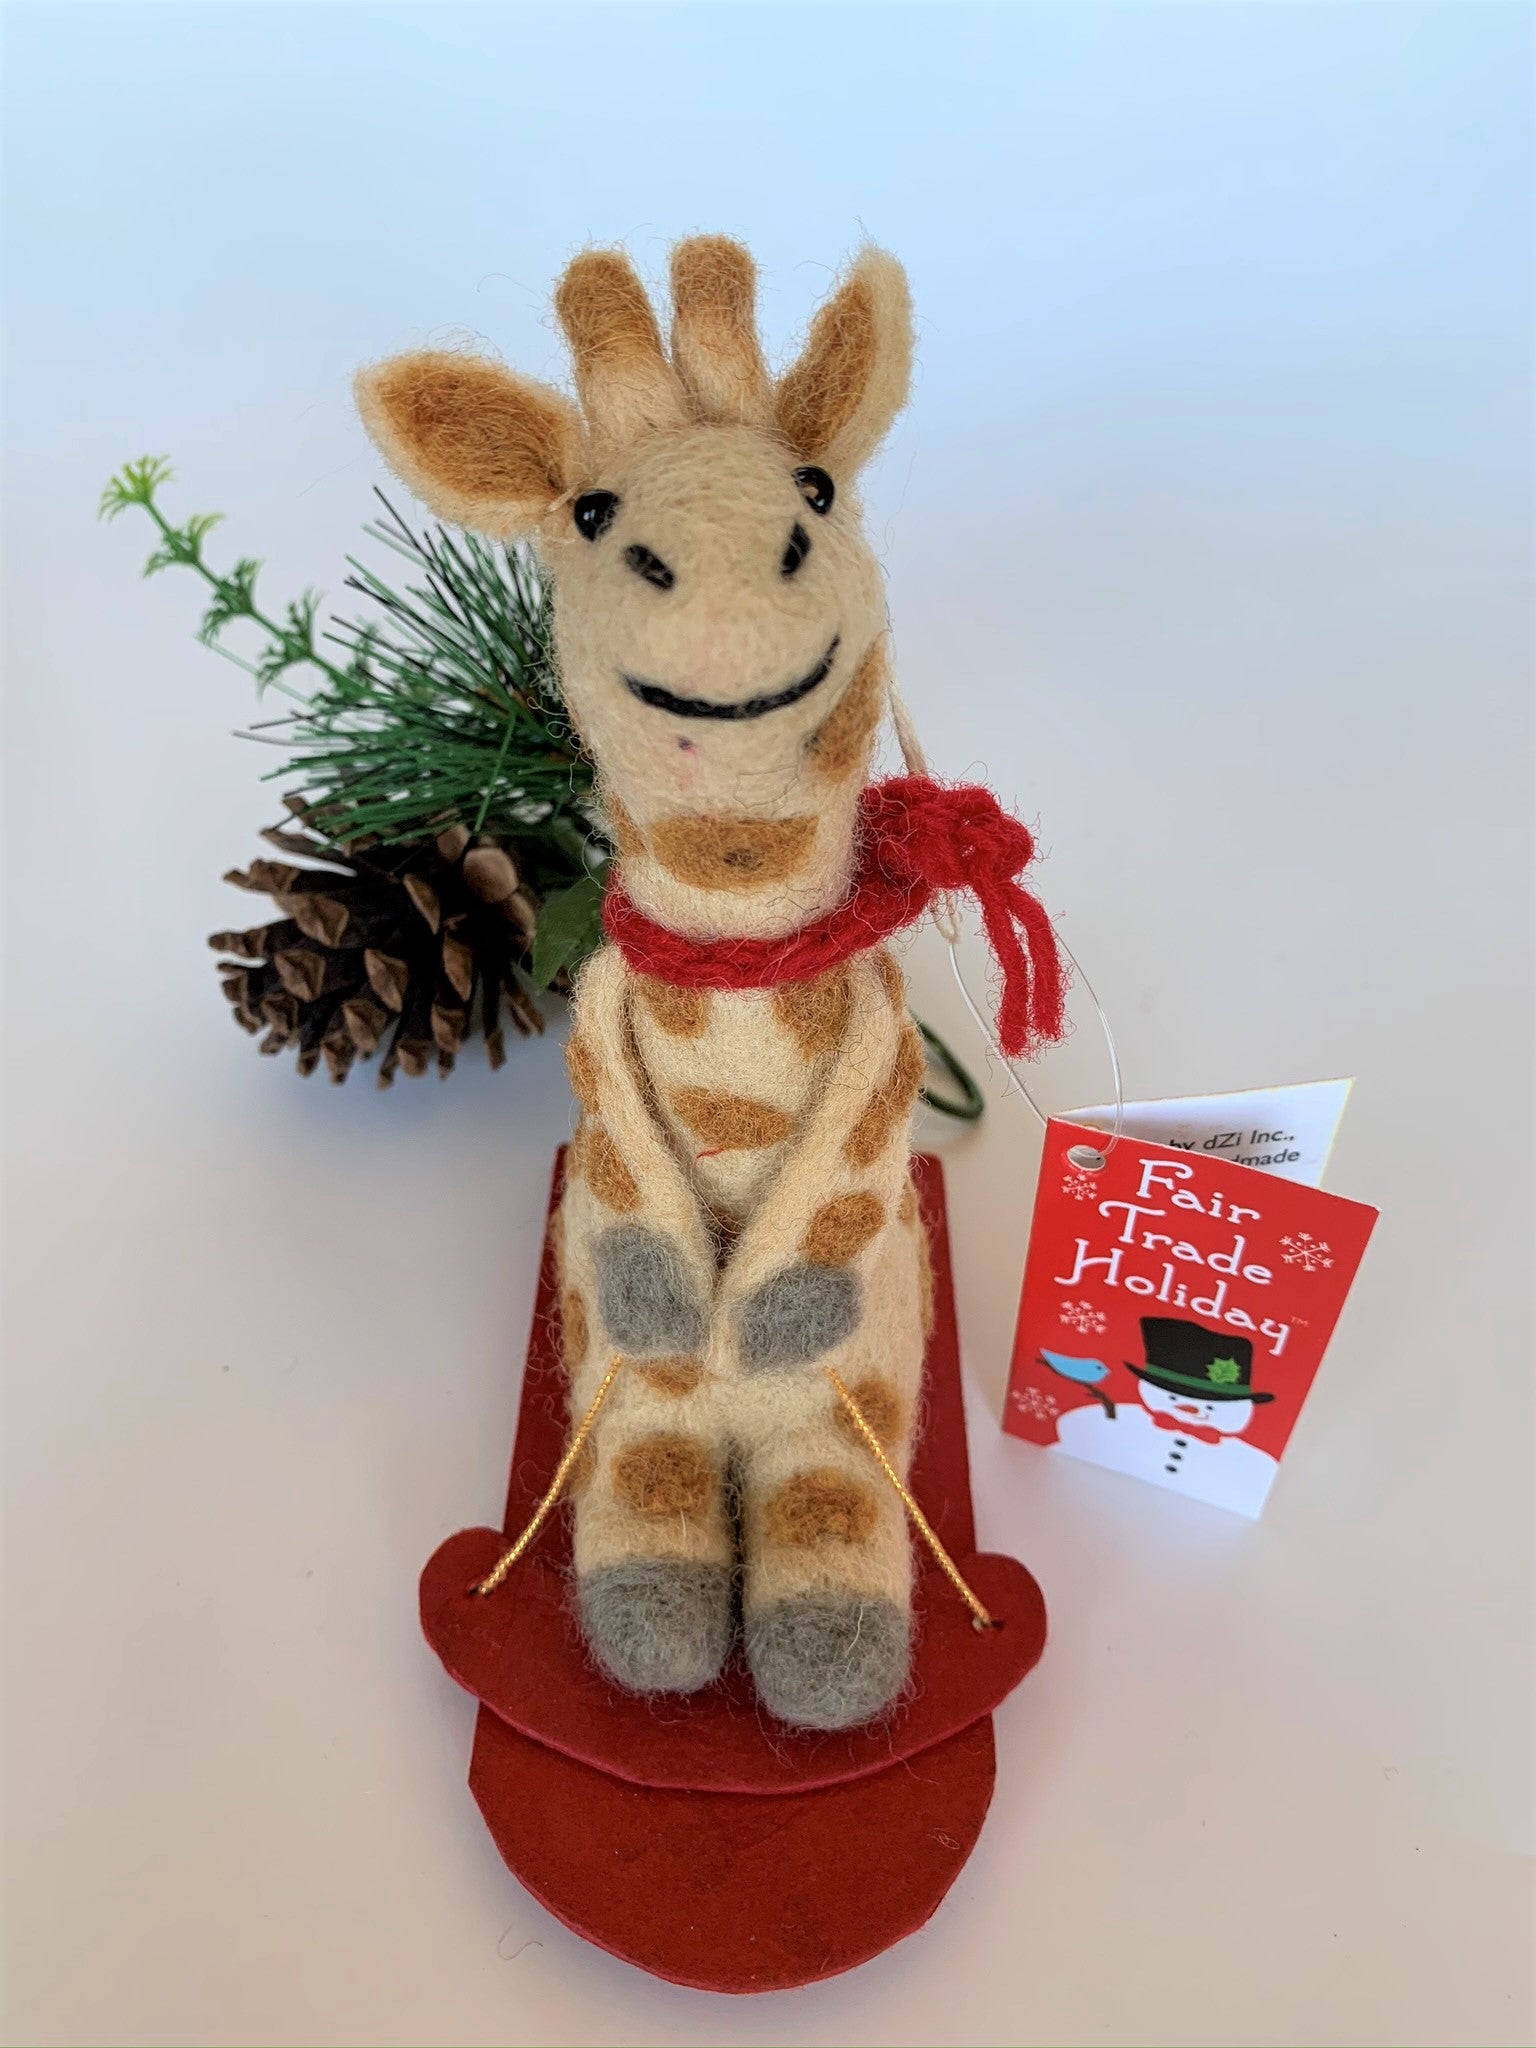 This is a sledding giraffe Christmas ornament that is handcrafted (fair trade) and made of 100% natural wool.  The sled is handmade using paper that is hardened and feels almost like thin wood.  It is tan with brown spots, gray accents on feet and hands, with black accents (mouth, eyes, etc.) and wearing a red winter scarf.  It sits on a red sled, holding a gold sled "rope."  Approximately 6"x4.75x1.5". It comes with a fair trade holiday "to/from" tag to use if giving this as a gift.